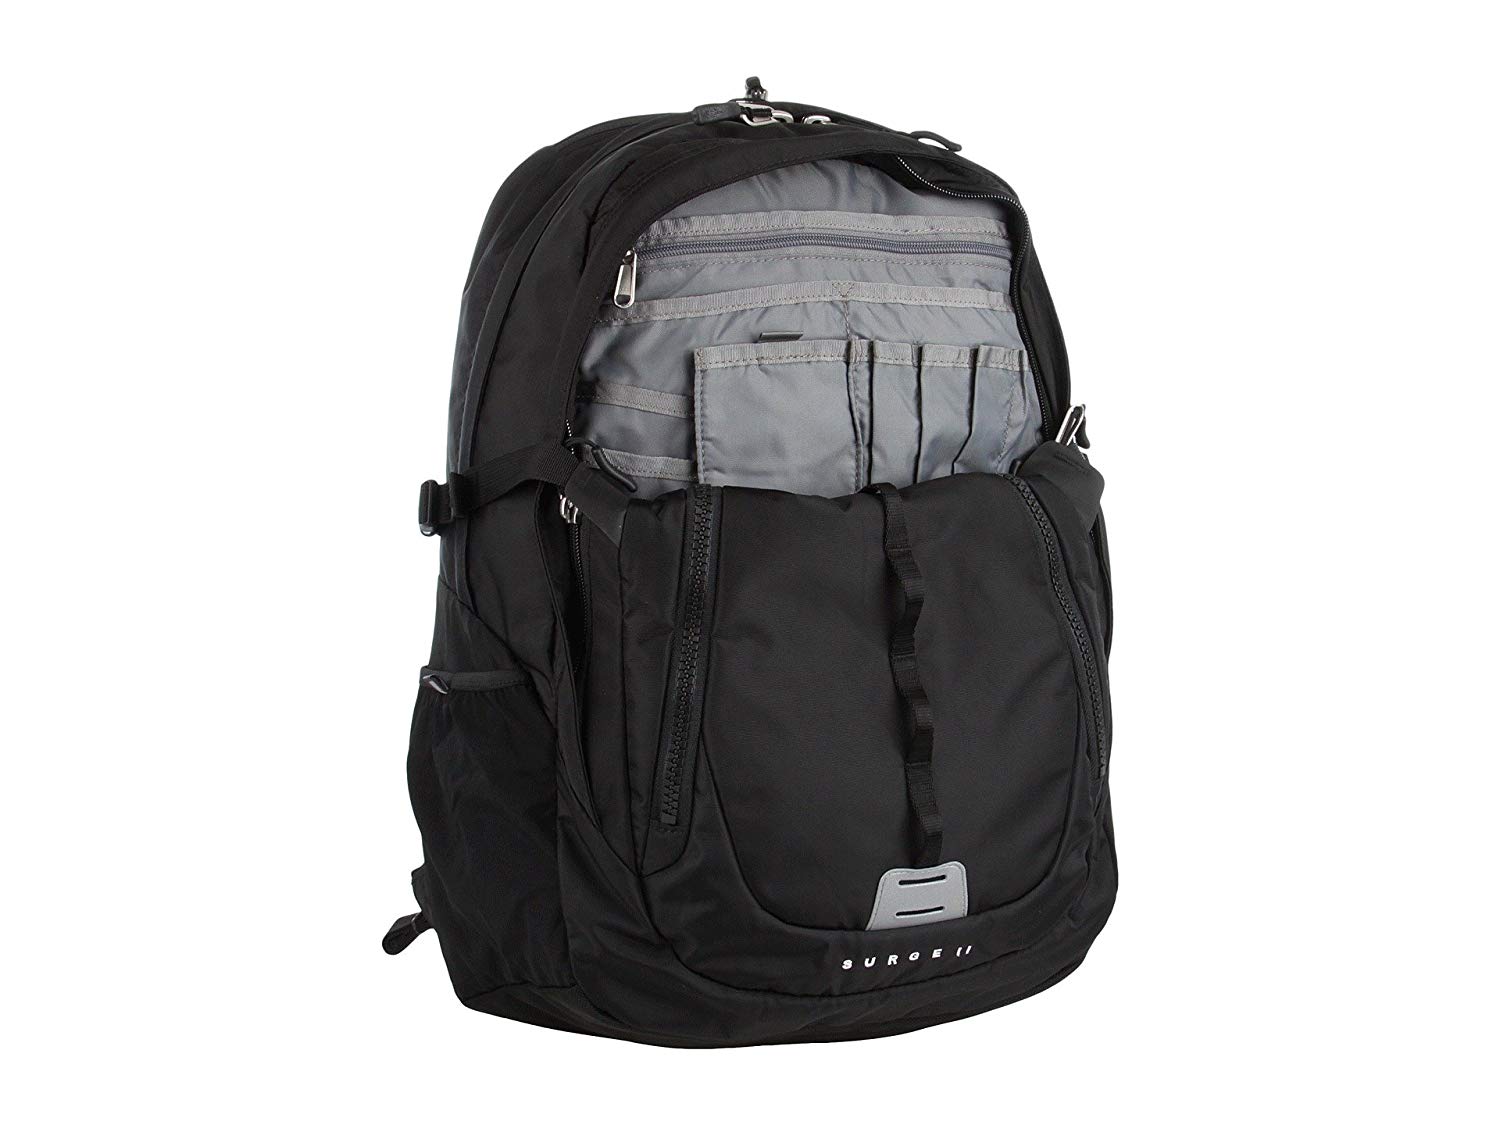 The North Face Surge II Backpack The North Face ktmart.vn 5